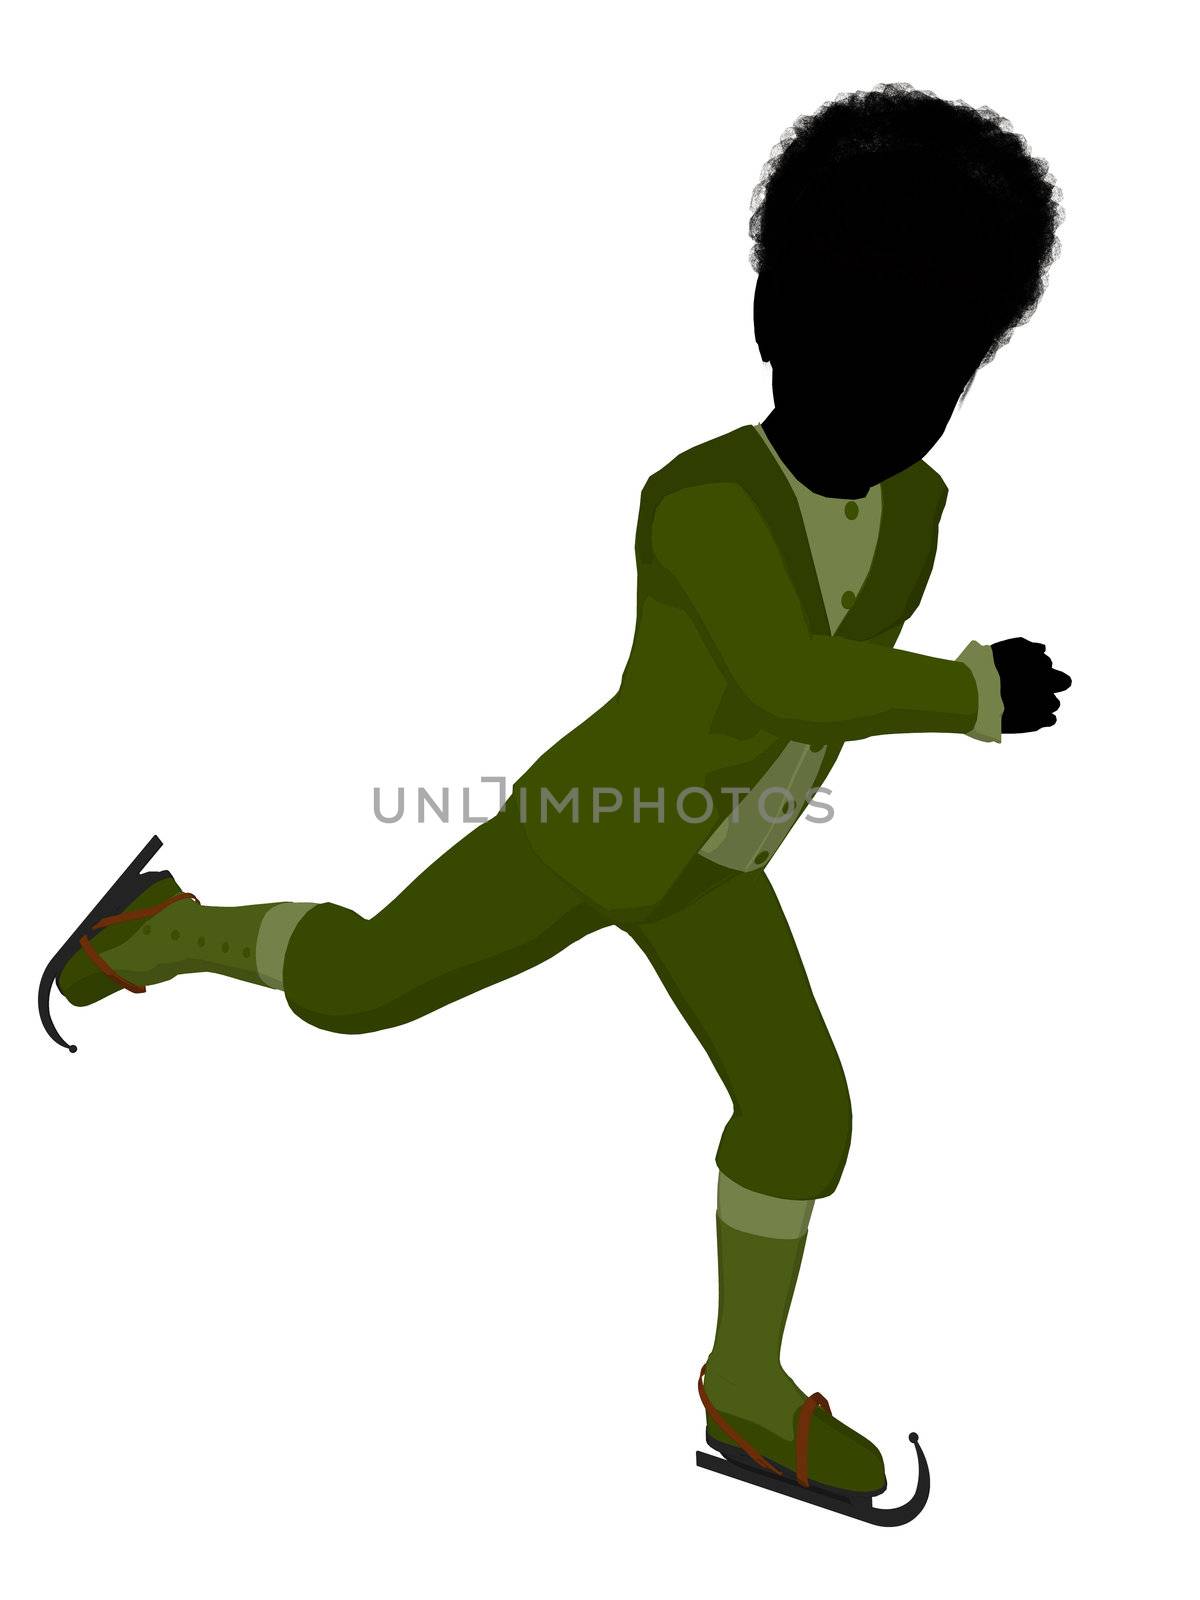 African American Victorian Boy Ice Skating Illustration Silhouet by kathygold